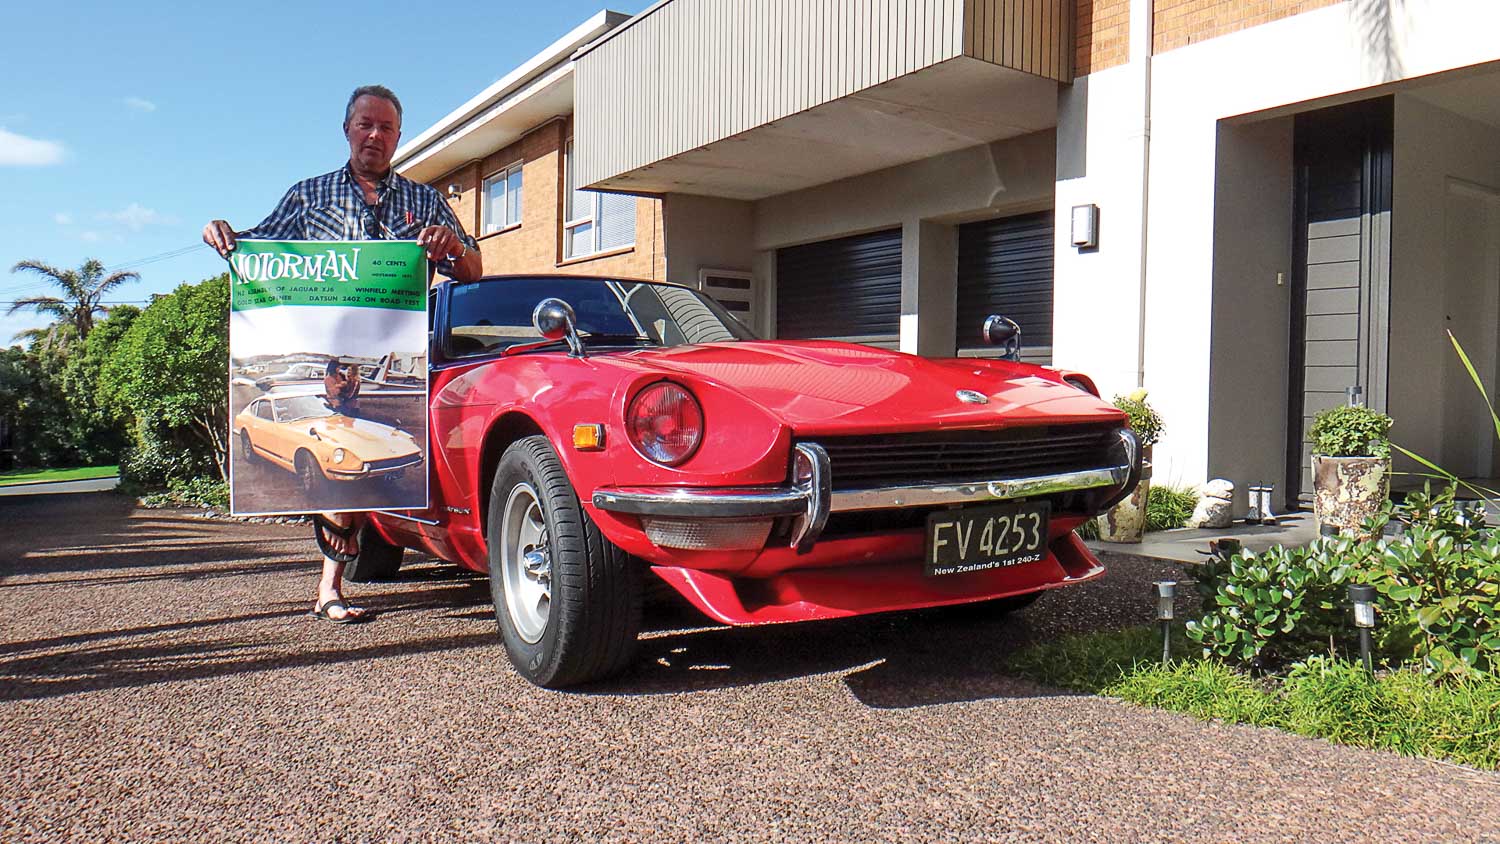 Ken Brough with his much-loved 240Z and a poster-sized blow-up of the Motorman cover from 44 years ago